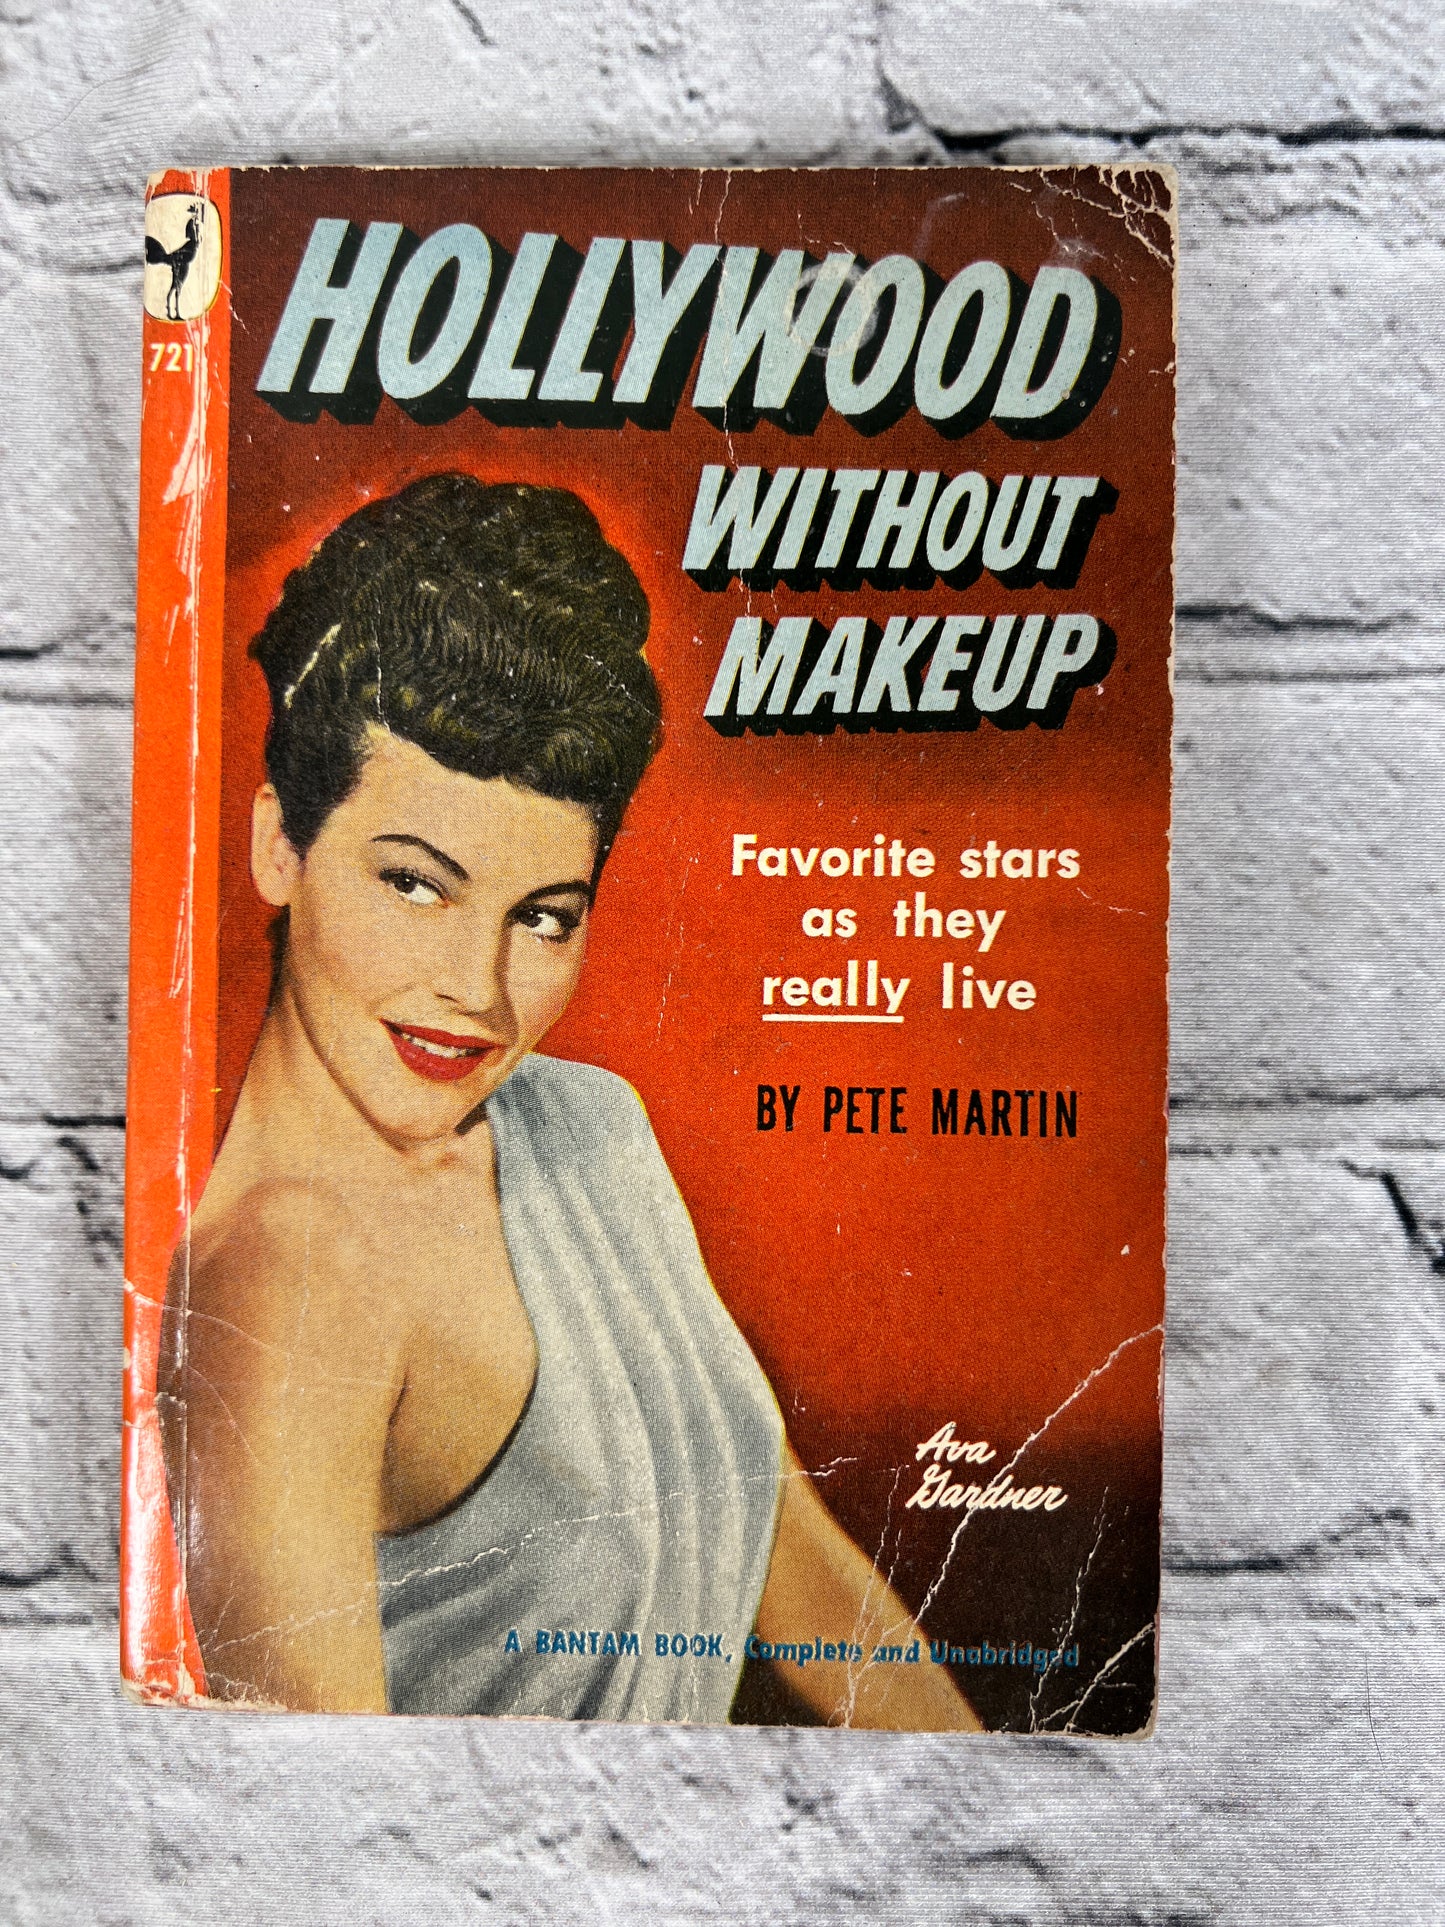 Hollywood Without Makeup Favorite Stars as they Really Live by Pete Martin [1949]